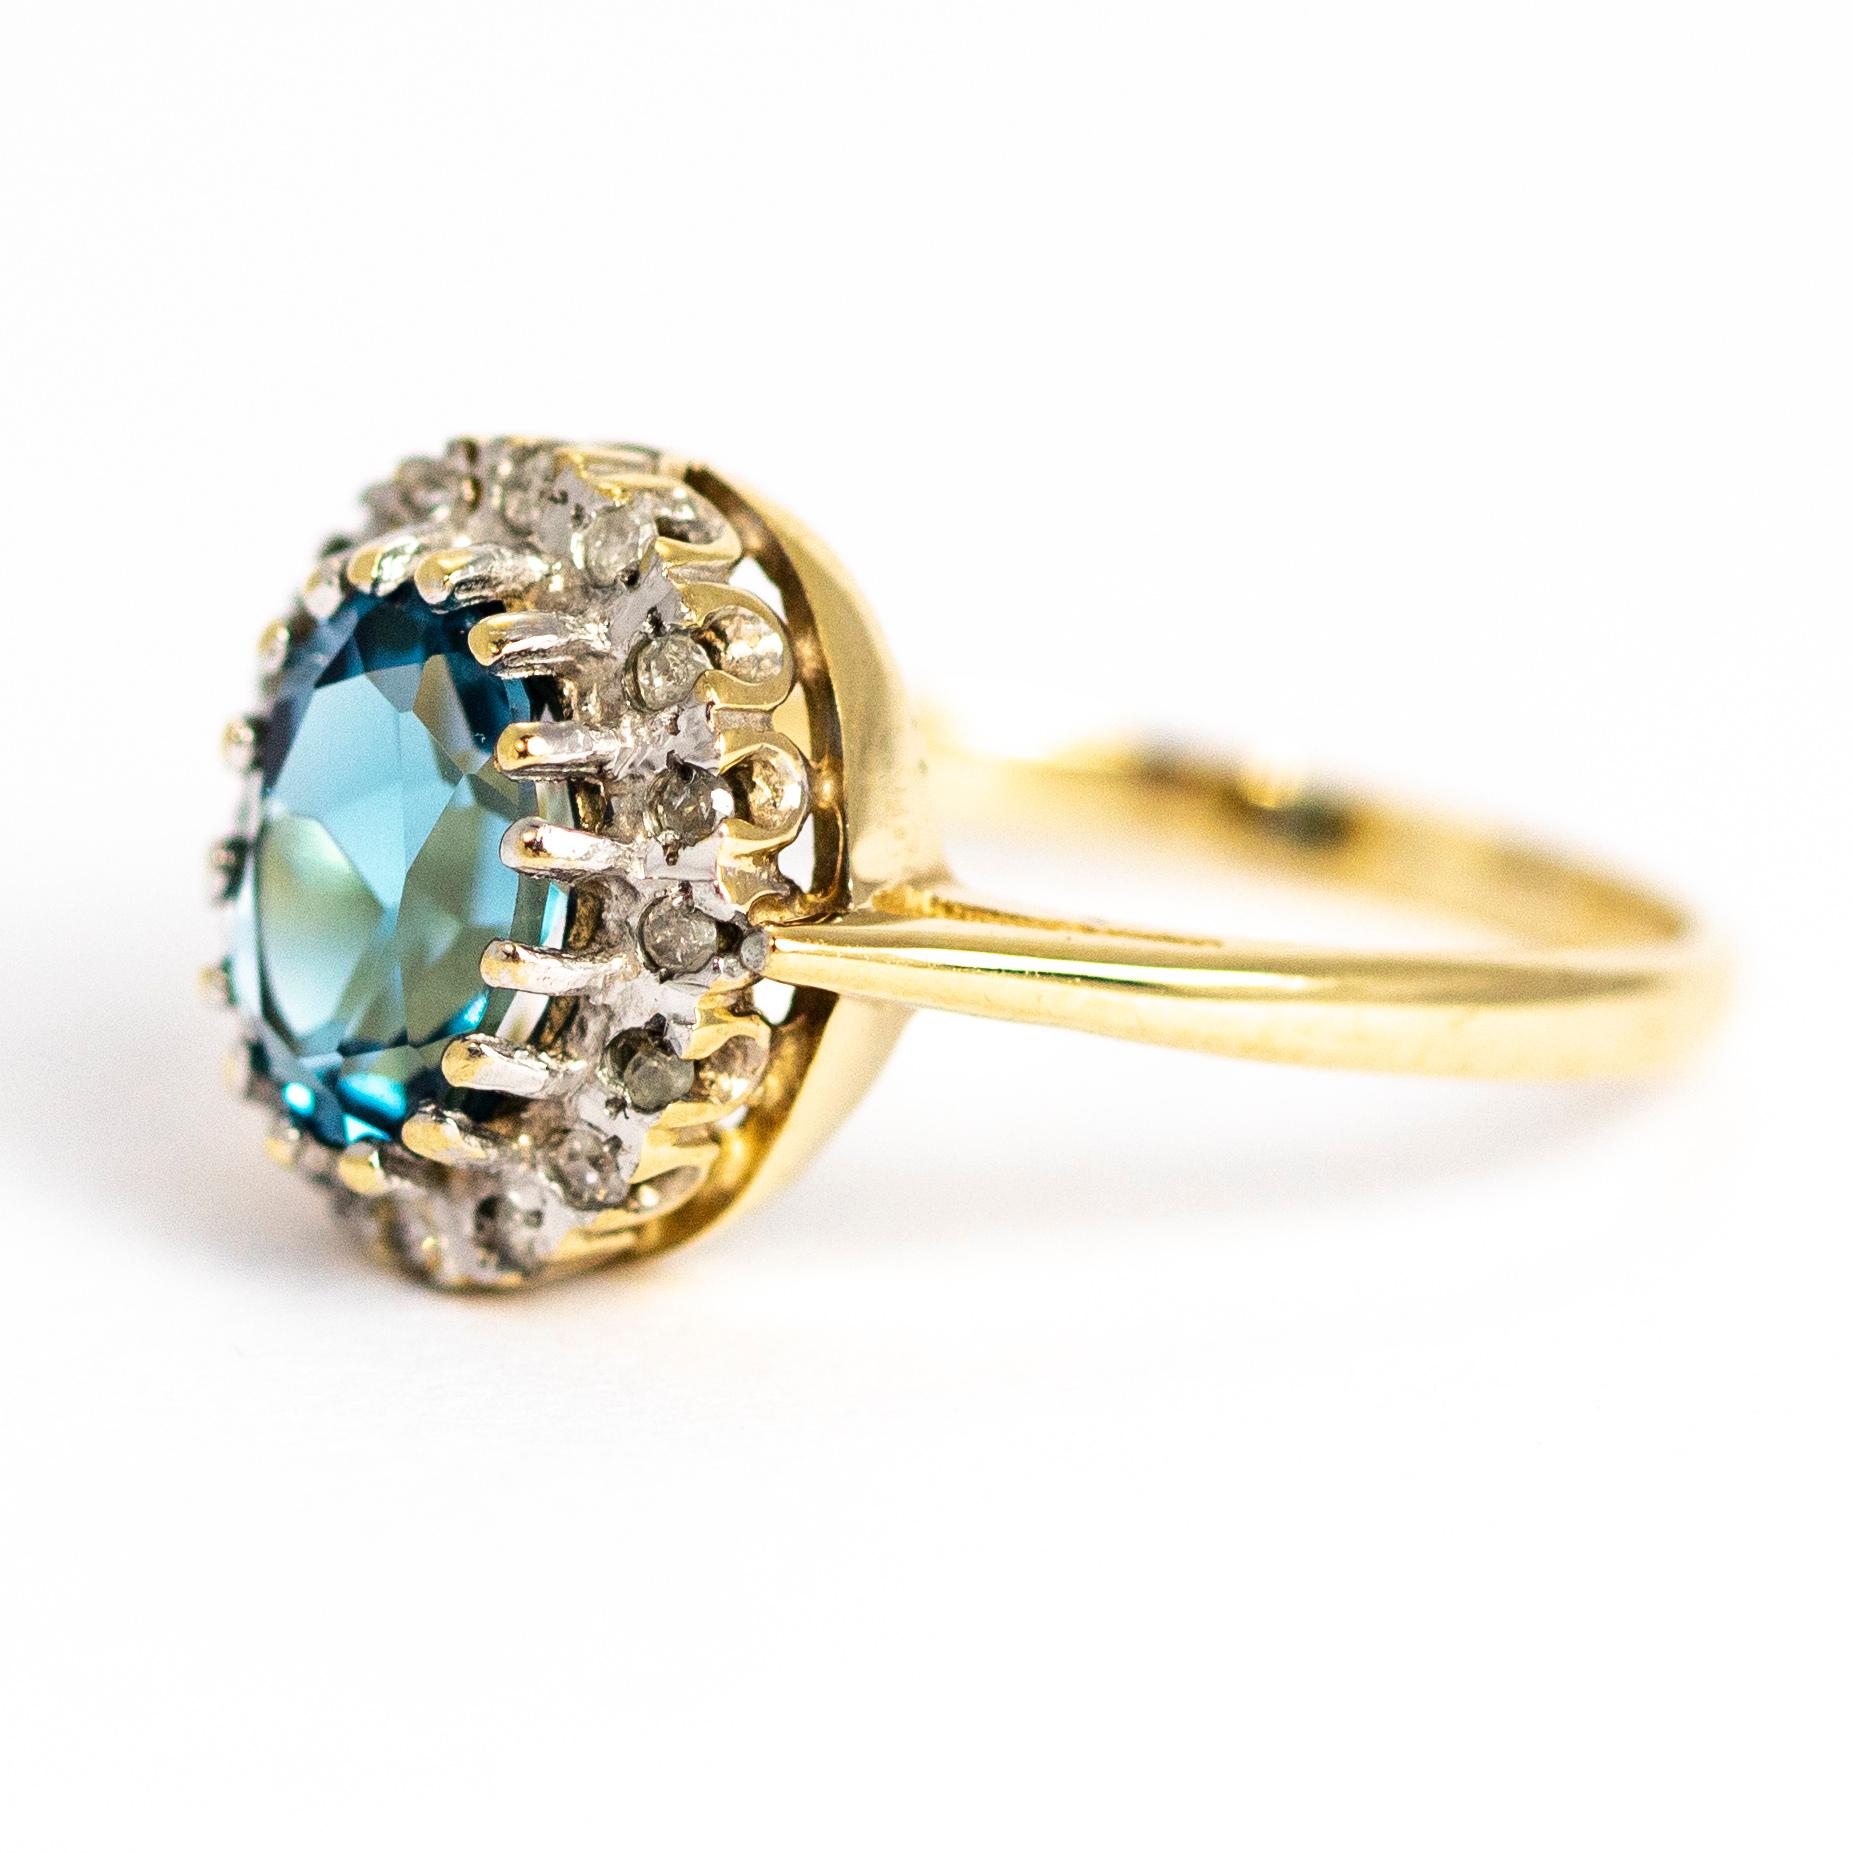 Perched in the centre of this cluster ring is a striking pale blue Aqua stone. Surrounding it is a hoop of smaller sparkling diamonds. The aqua measures approximately 1 carat. Modelled in 9ct gold. Made in Birmingham, England.

Ring size: M or 6 1/4